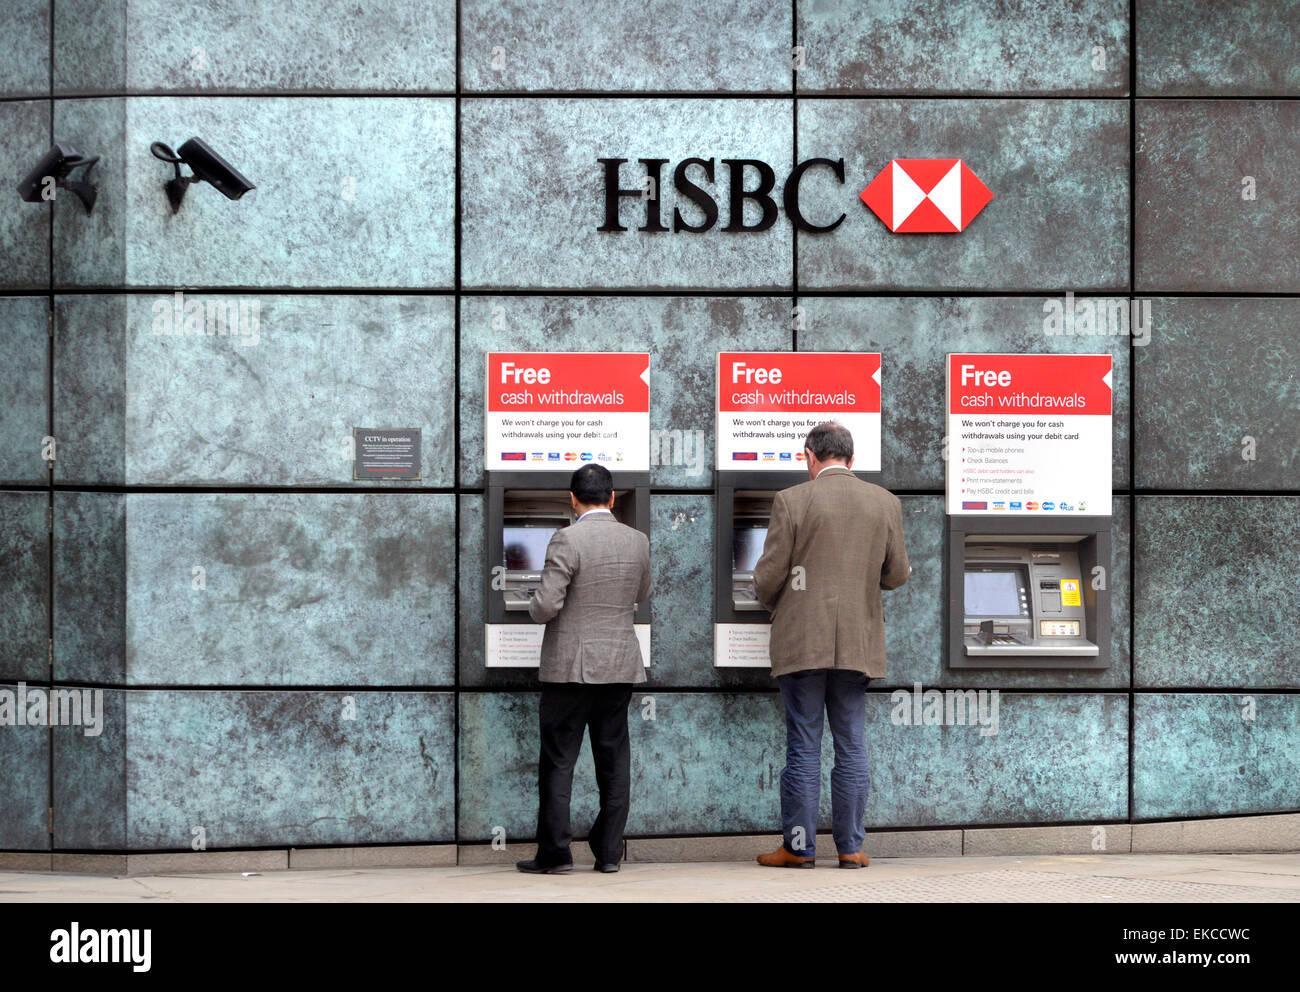 London, England, UK. HSBC ATMs / cash dispensers in The City Stock Photo